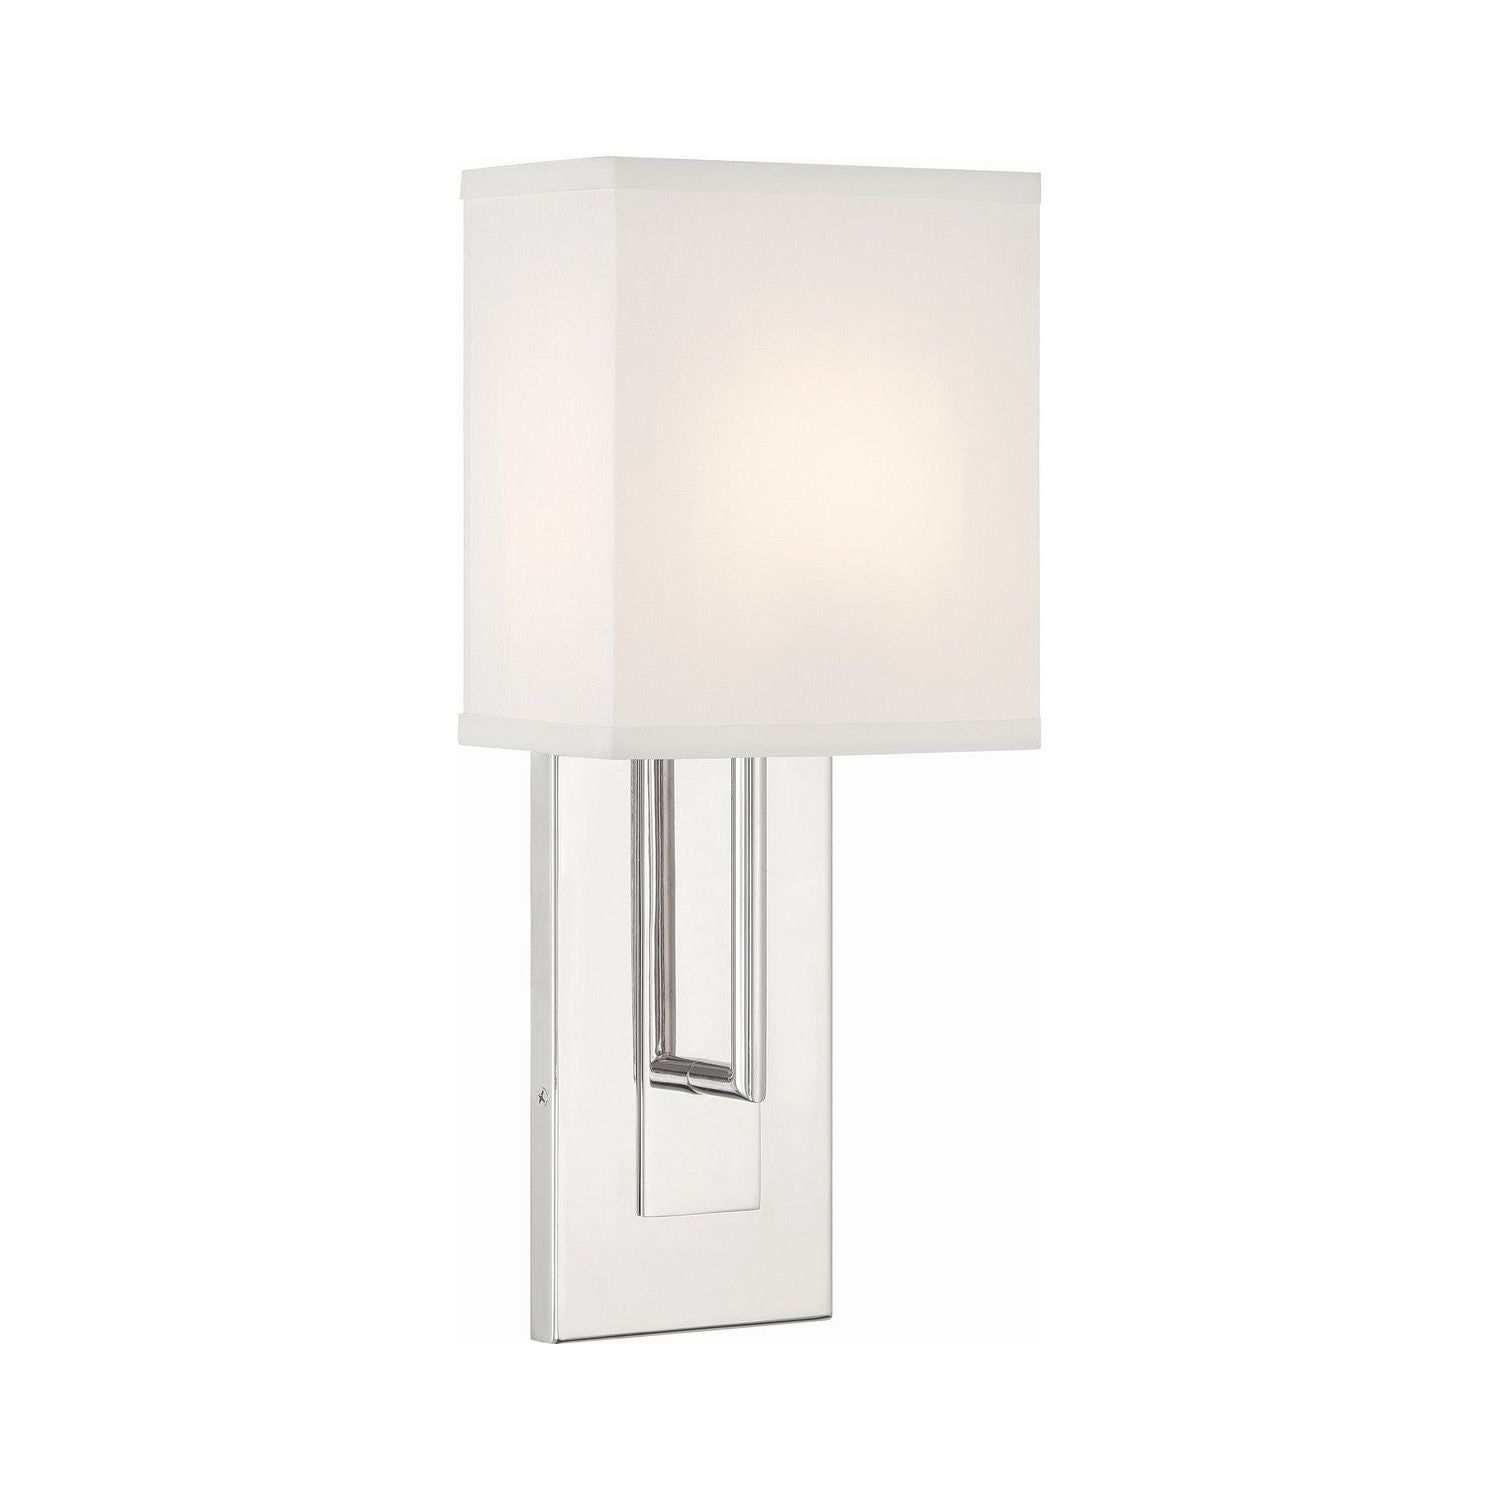 Crystorama - BRE-A3631-PN - One Light Wall Sconce - Brent - Polished Nickel